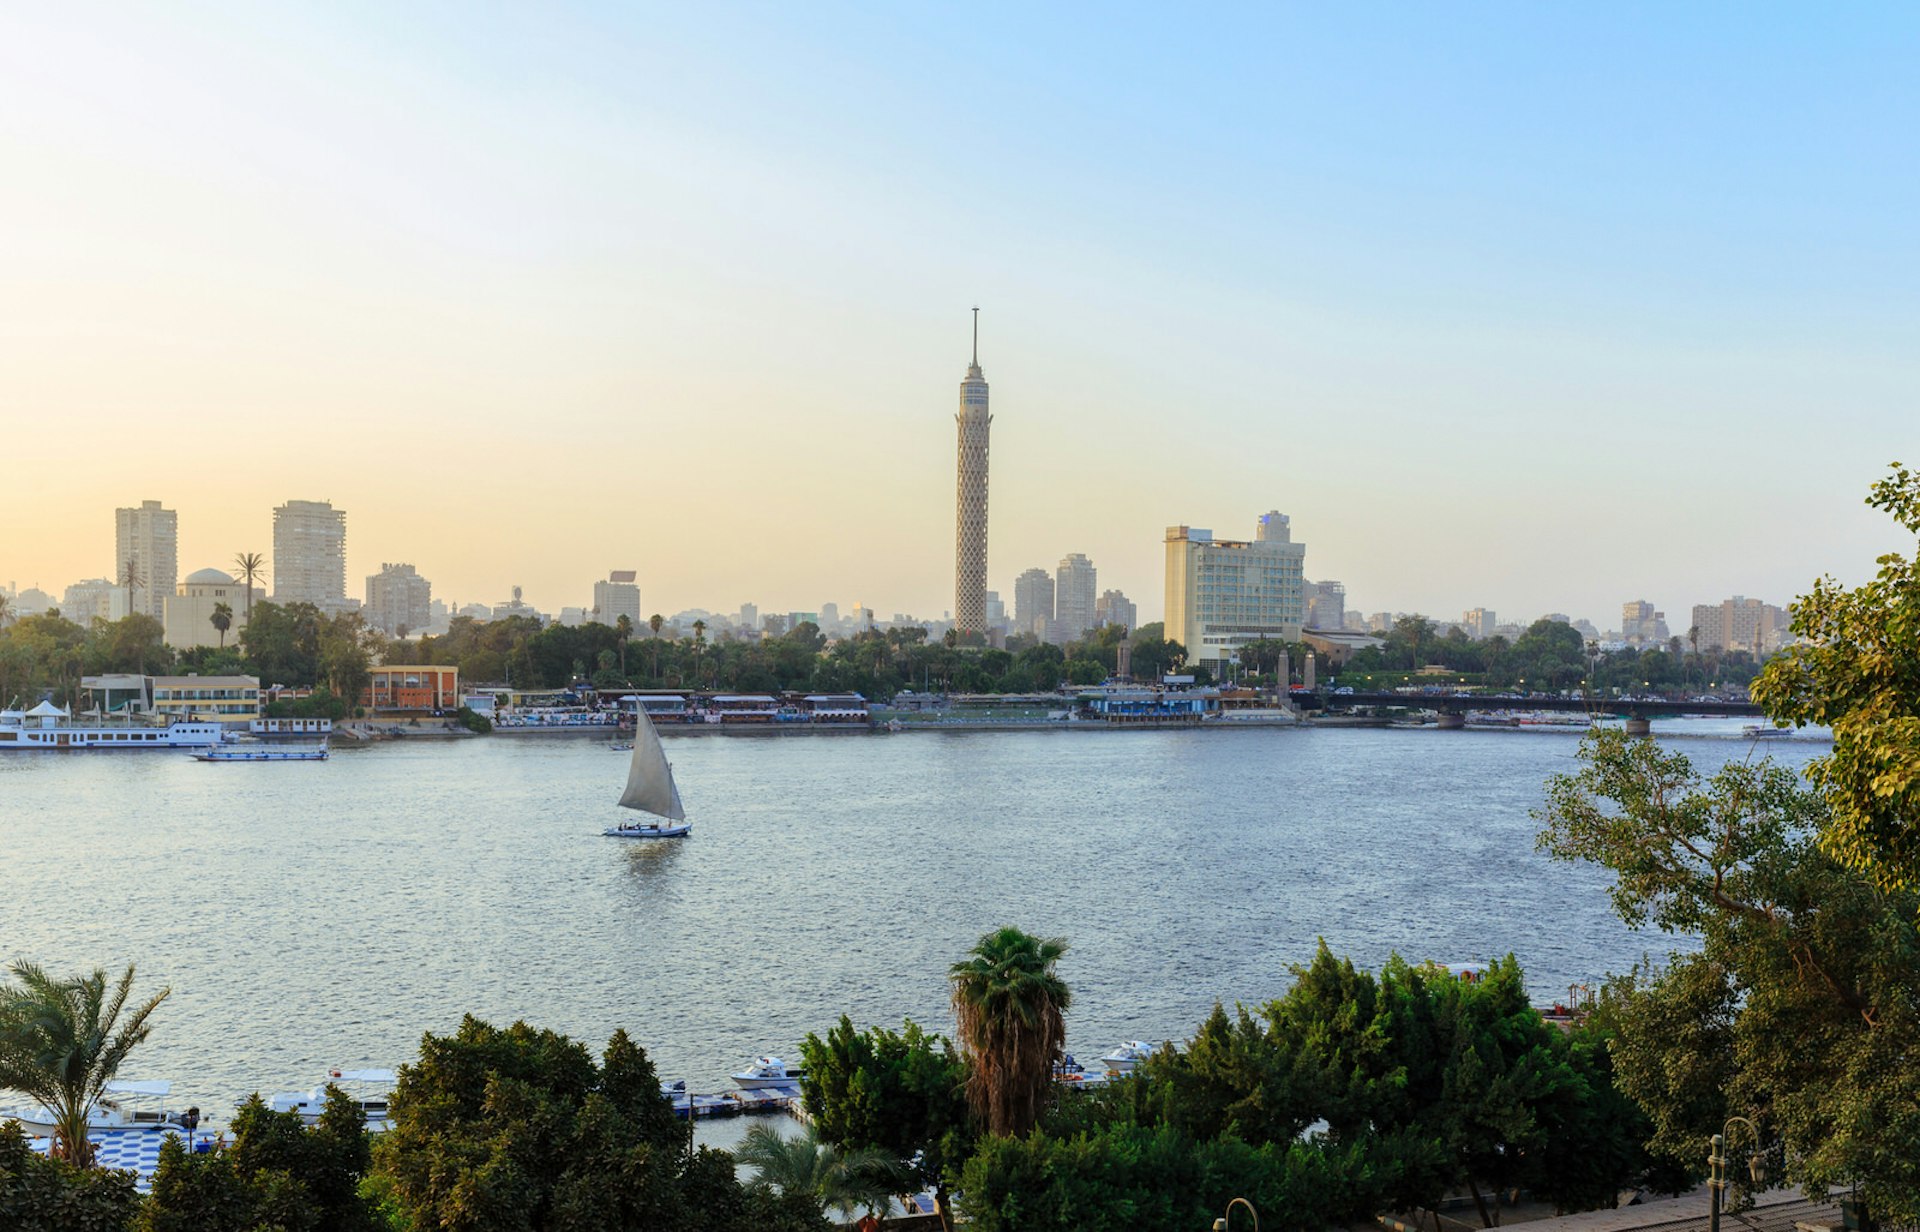 Boat sailing along the Nile in Cairo, Egypt